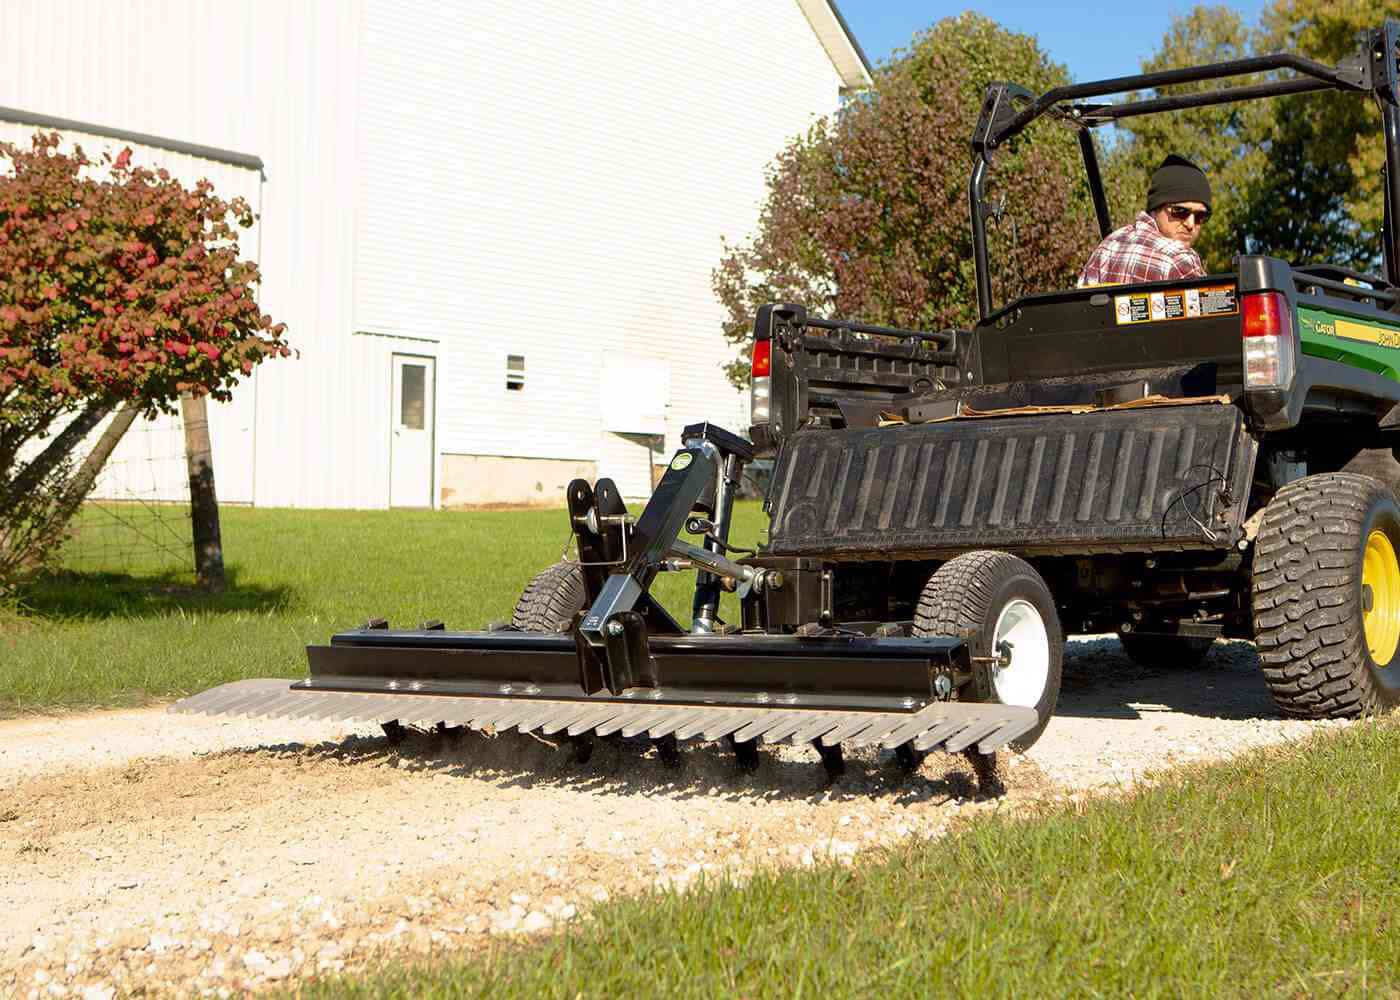  Guide Gear Plow Attachment for Lawn Tractor and ATV, 48  Tow-Behind UTV/ATV Plow : Patio, Lawn & Garden